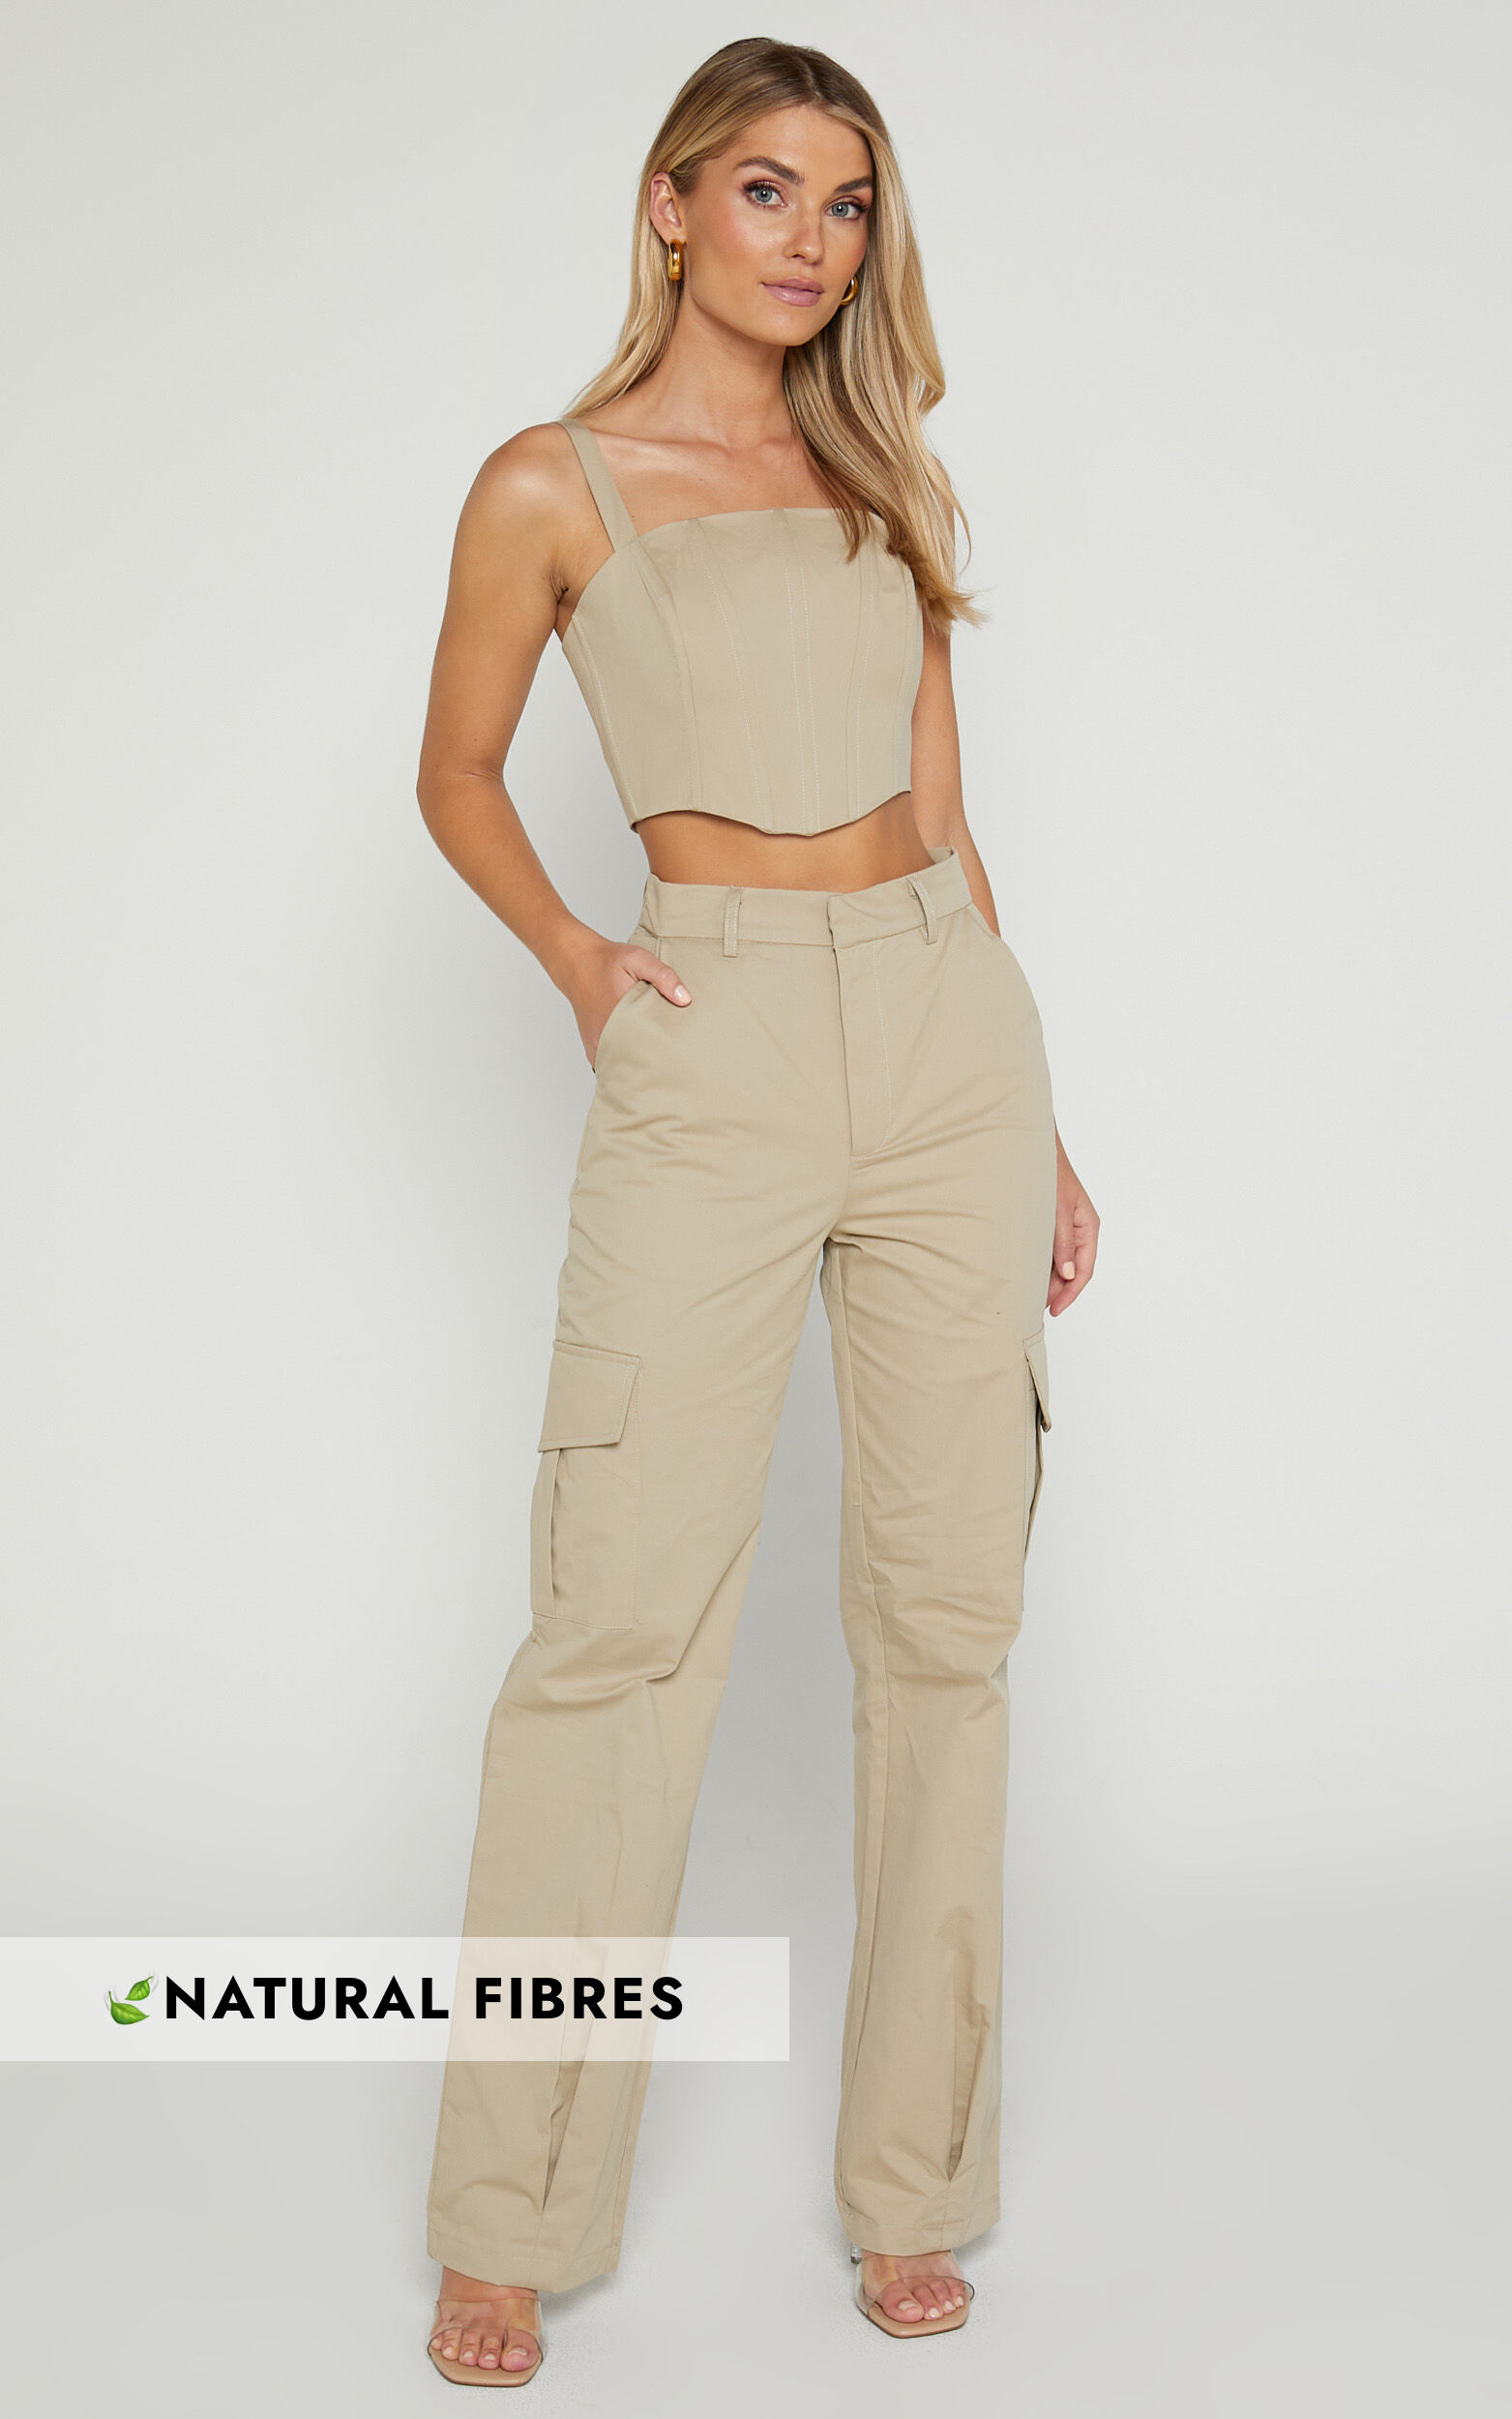 https://images.showpo.com/dw/image/v2/BDPQ_PRD/on/demandware.static/-/Sites-sp-master-catalog/default/dw974d1f9a/images/diana-two-piece-set-corset-top-high-waisted-straight-leg-pants-SC23090008/Diana_Two_Piece_Set_-_Corset_top_High_Waisted_Straight_Leg_Pants_in_Taupe_1.jpg?sw=1563&sh=2500